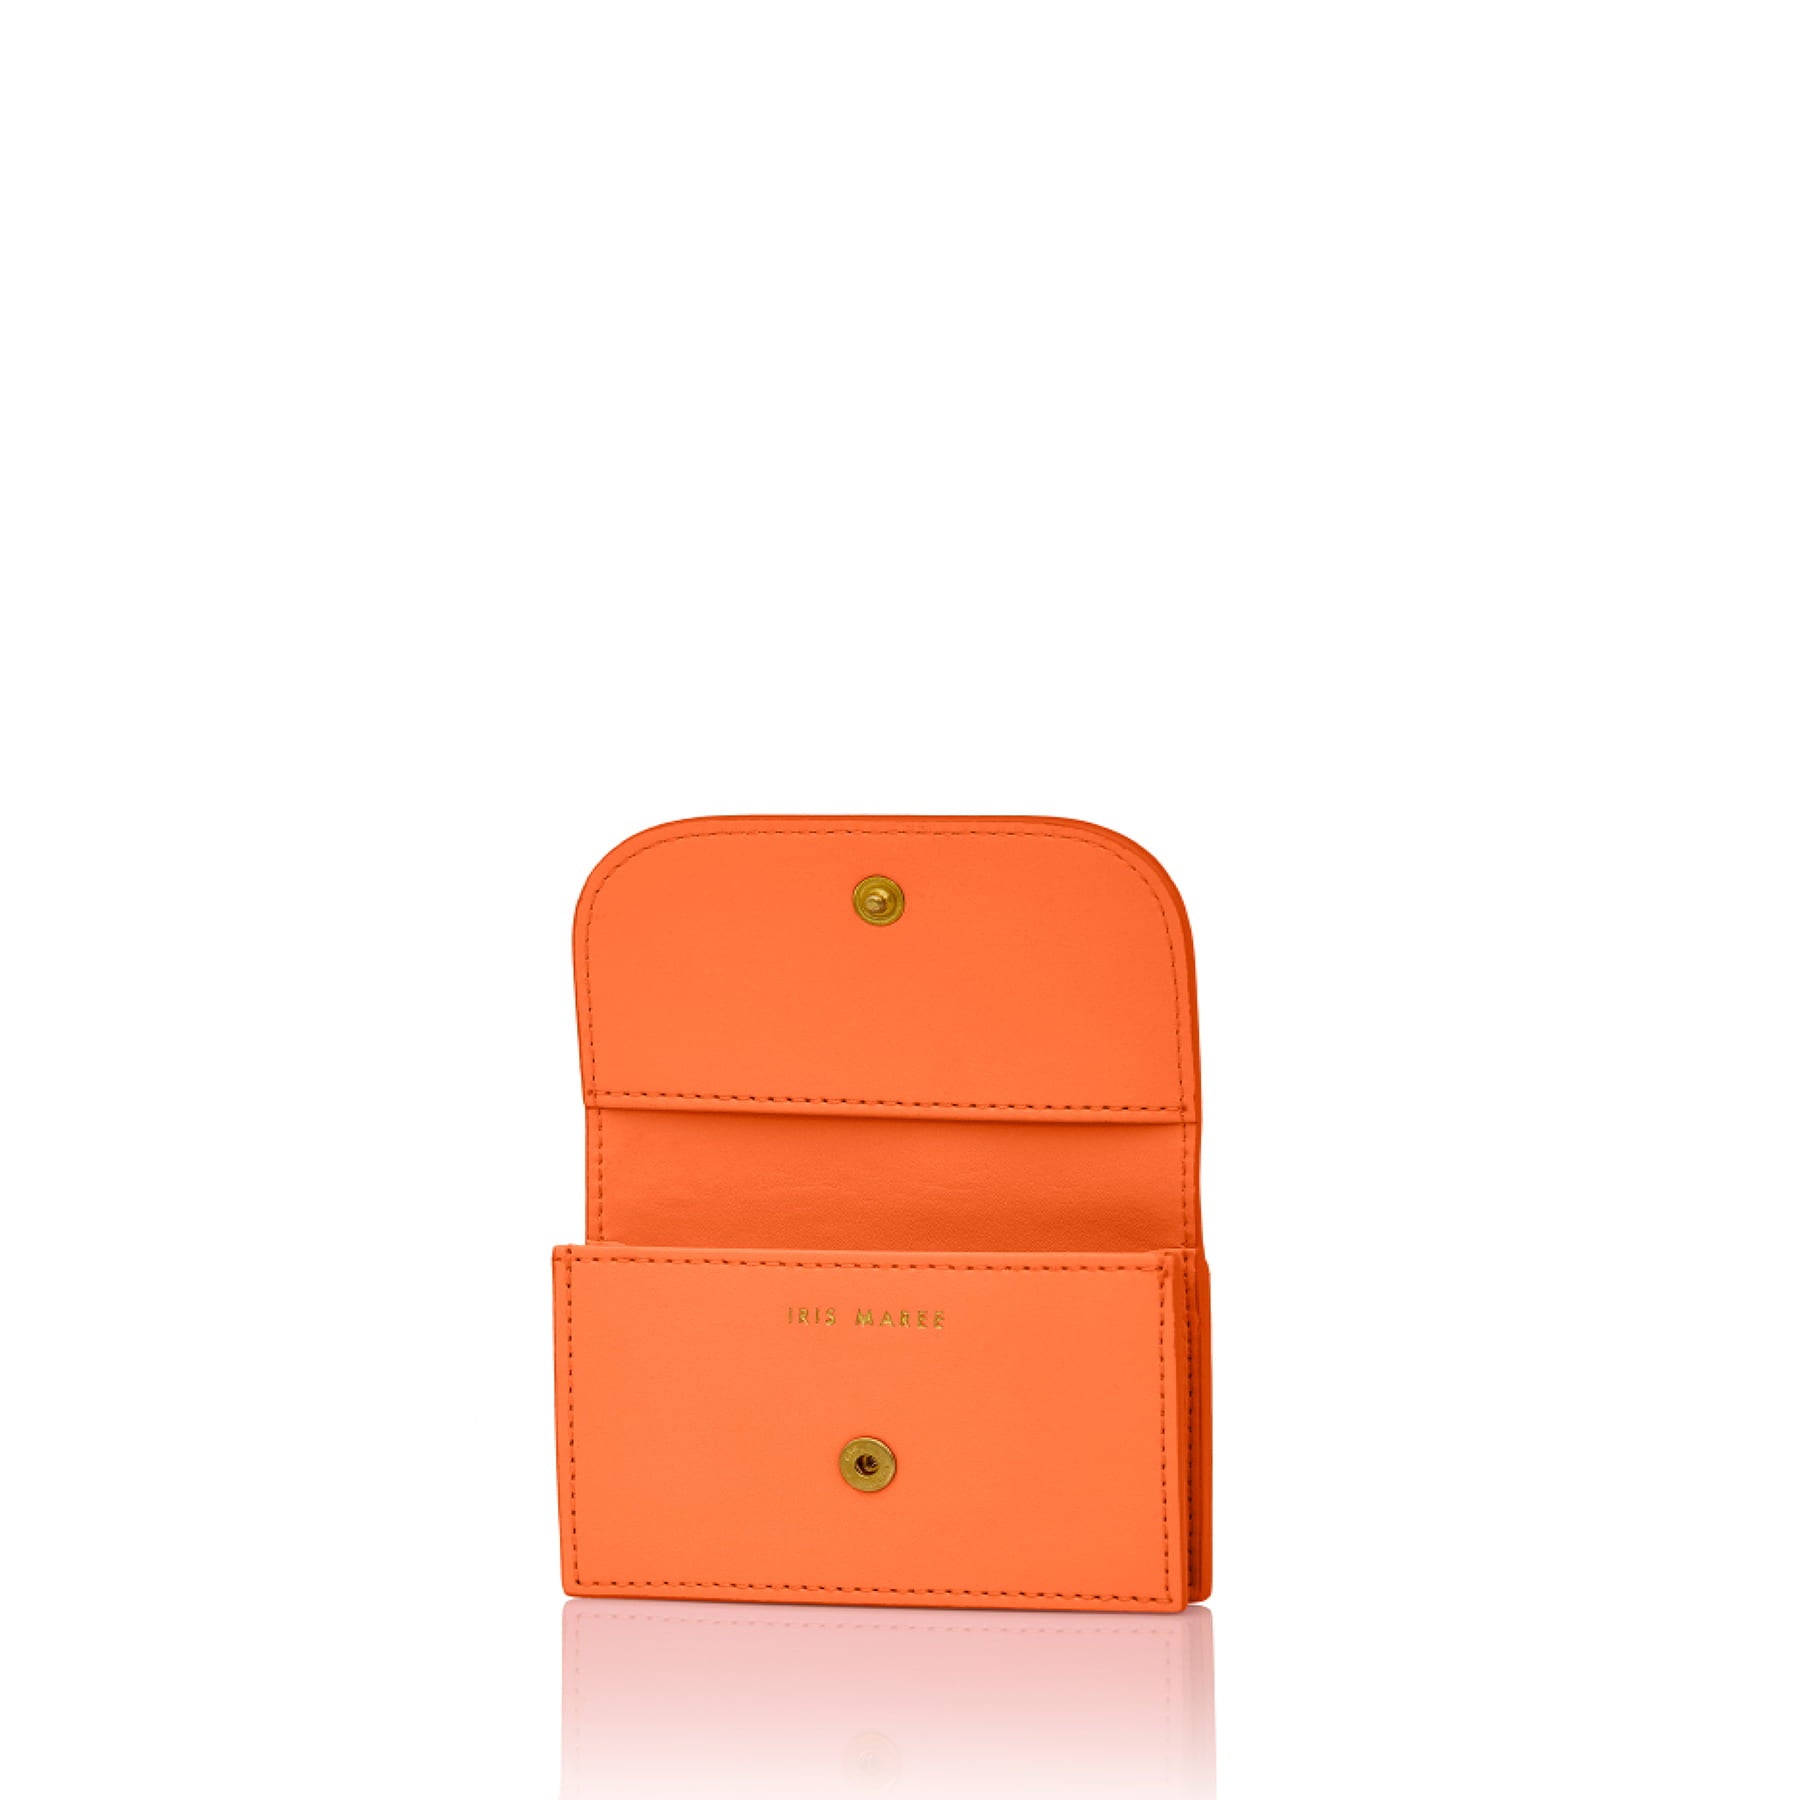 Julian petite Parrot Orange with pink and white Iris Maree logo on back side of card case